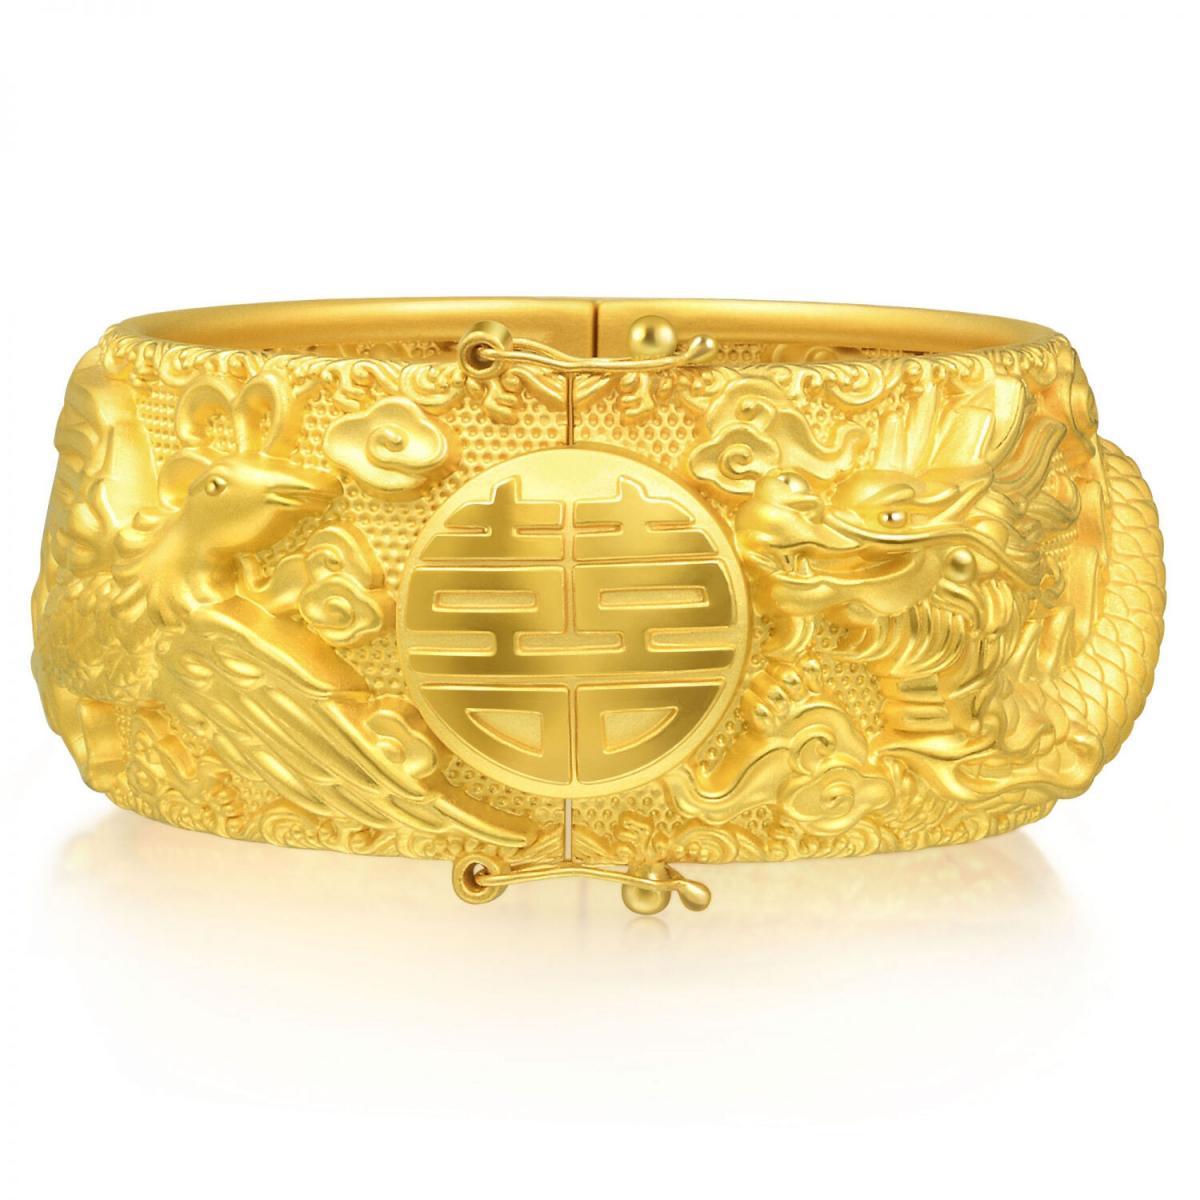 Chinese Wedding Collection 999.9 Gold Bangle 91875K Price-by-Weight approx 0.99 tael